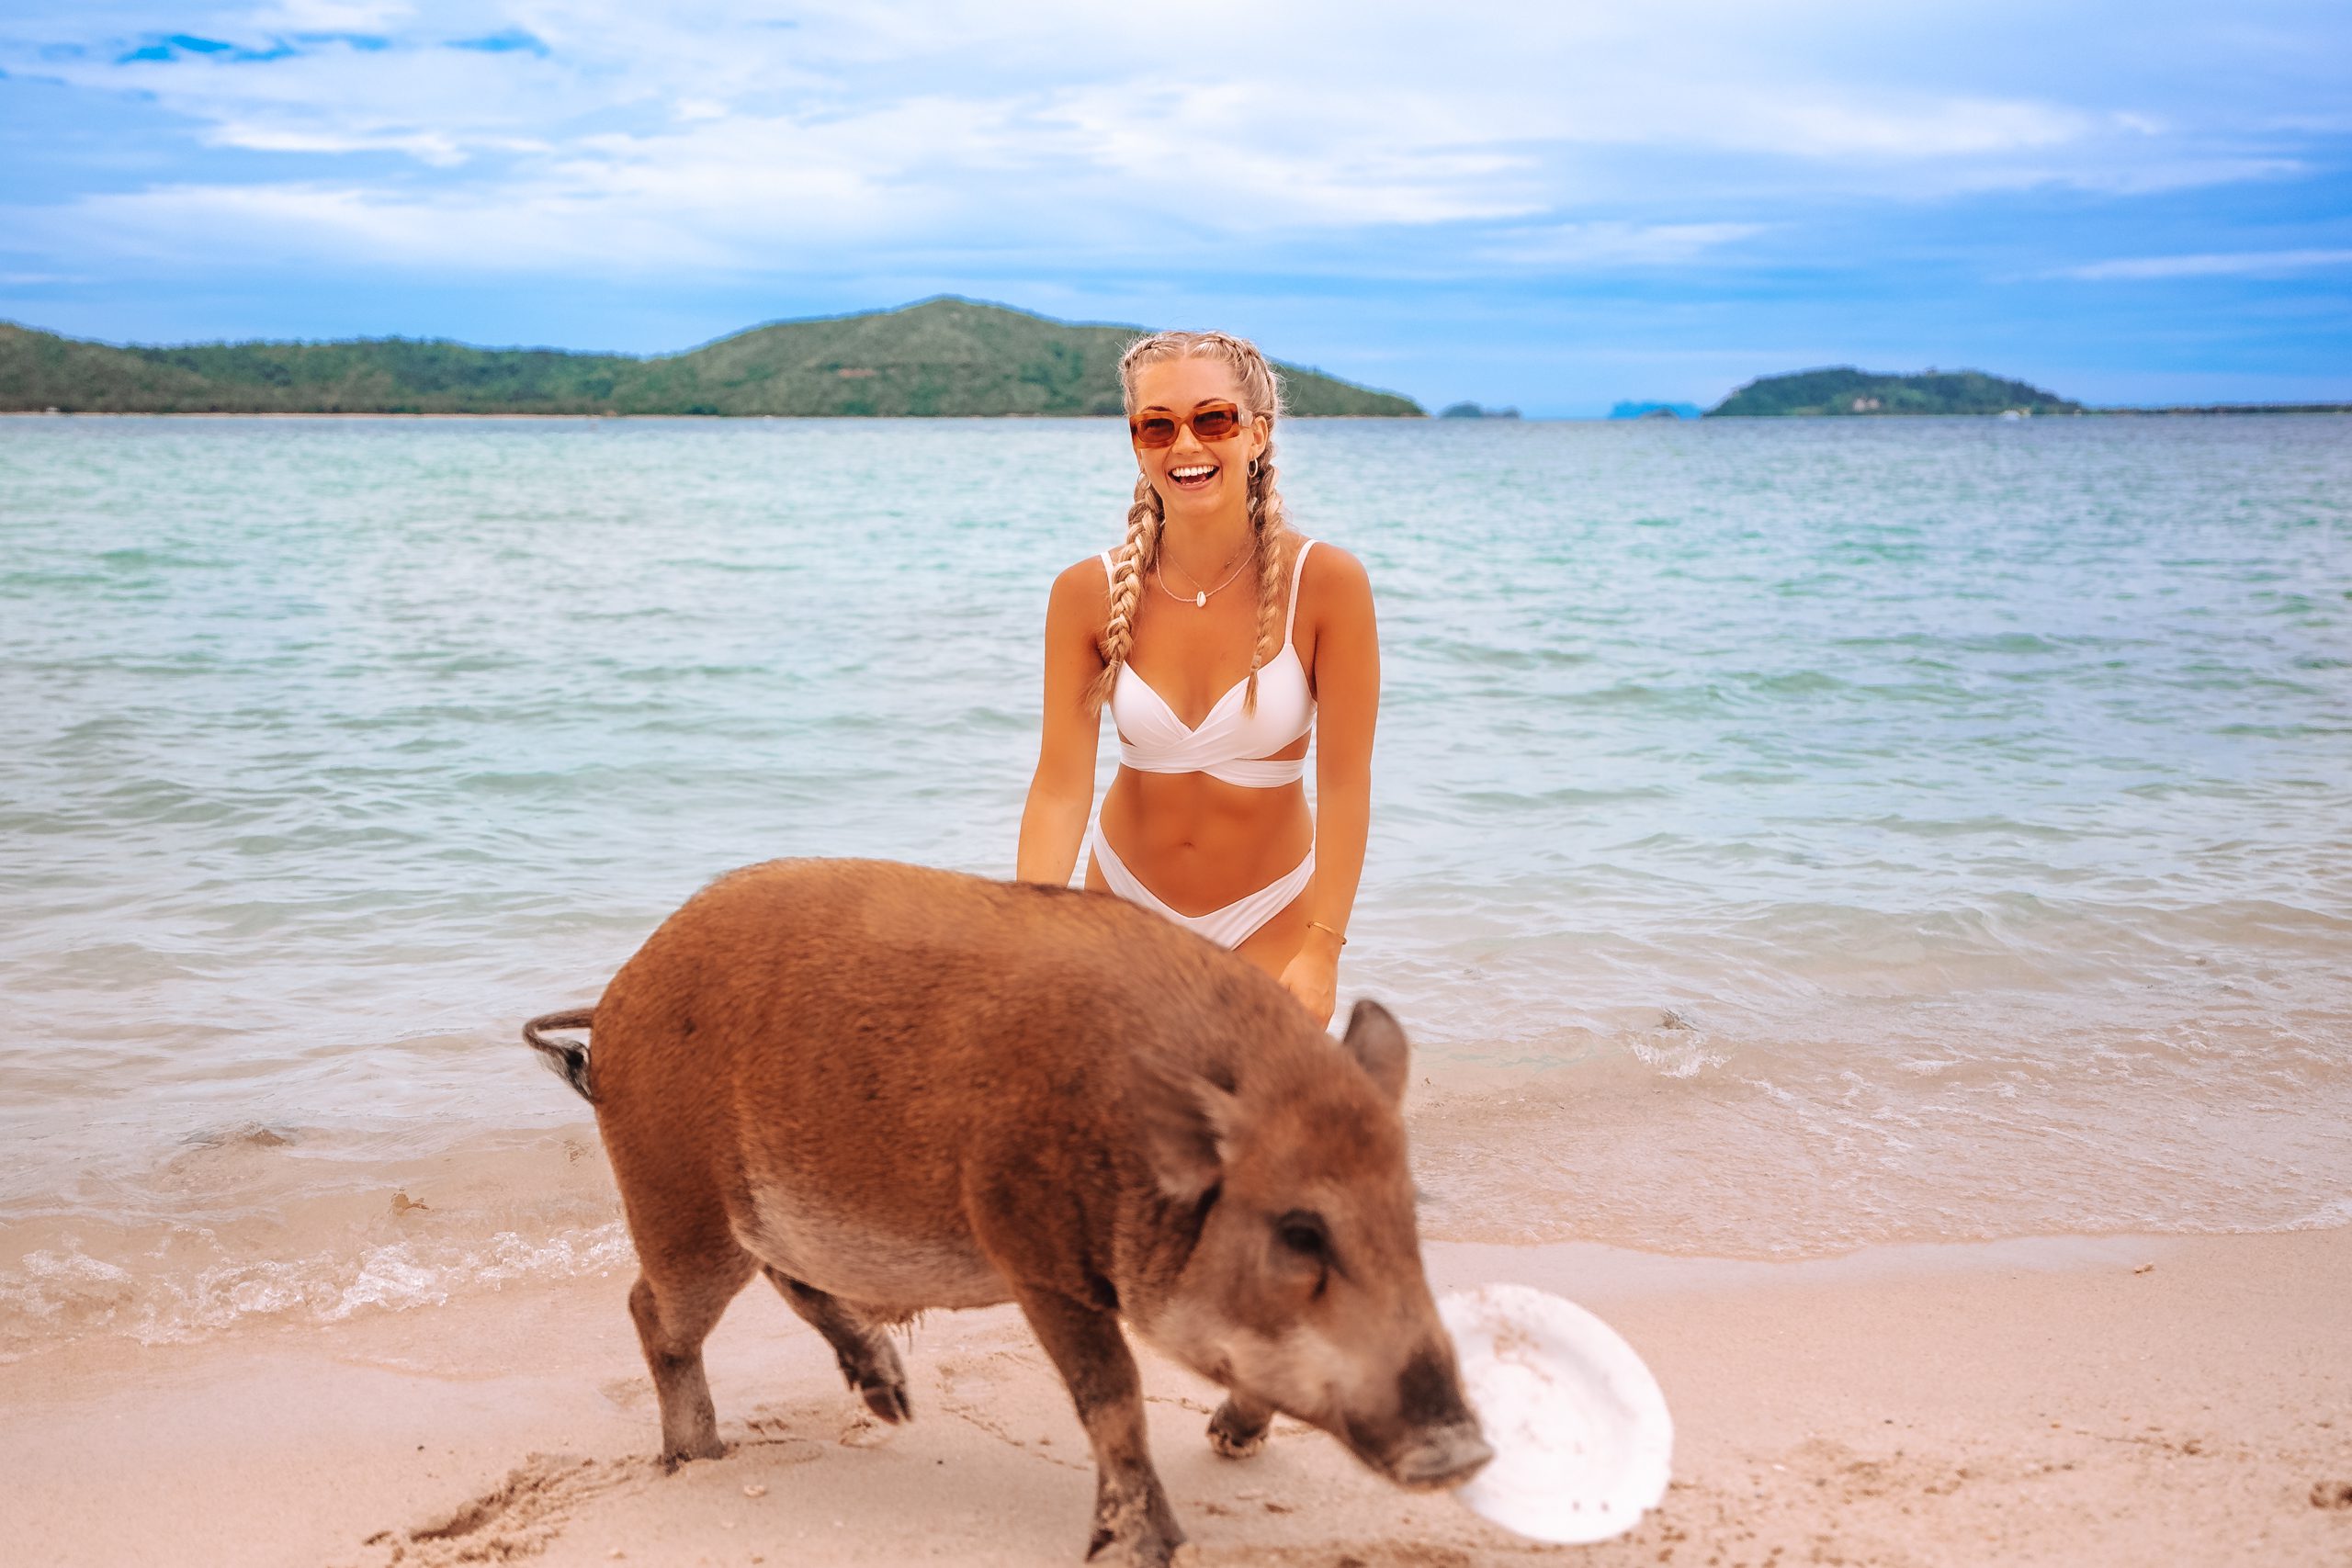 This photo shows a pig running on the beach on and isolated island called Pig Island Thailand in front of a young women in bikini, who is sitting on her knees in the waterline. The pig has stolen her plate with fodder and this is a great example of how lovely the wild pigs at Pig Island Koh Mudsum near Koh Samui are.